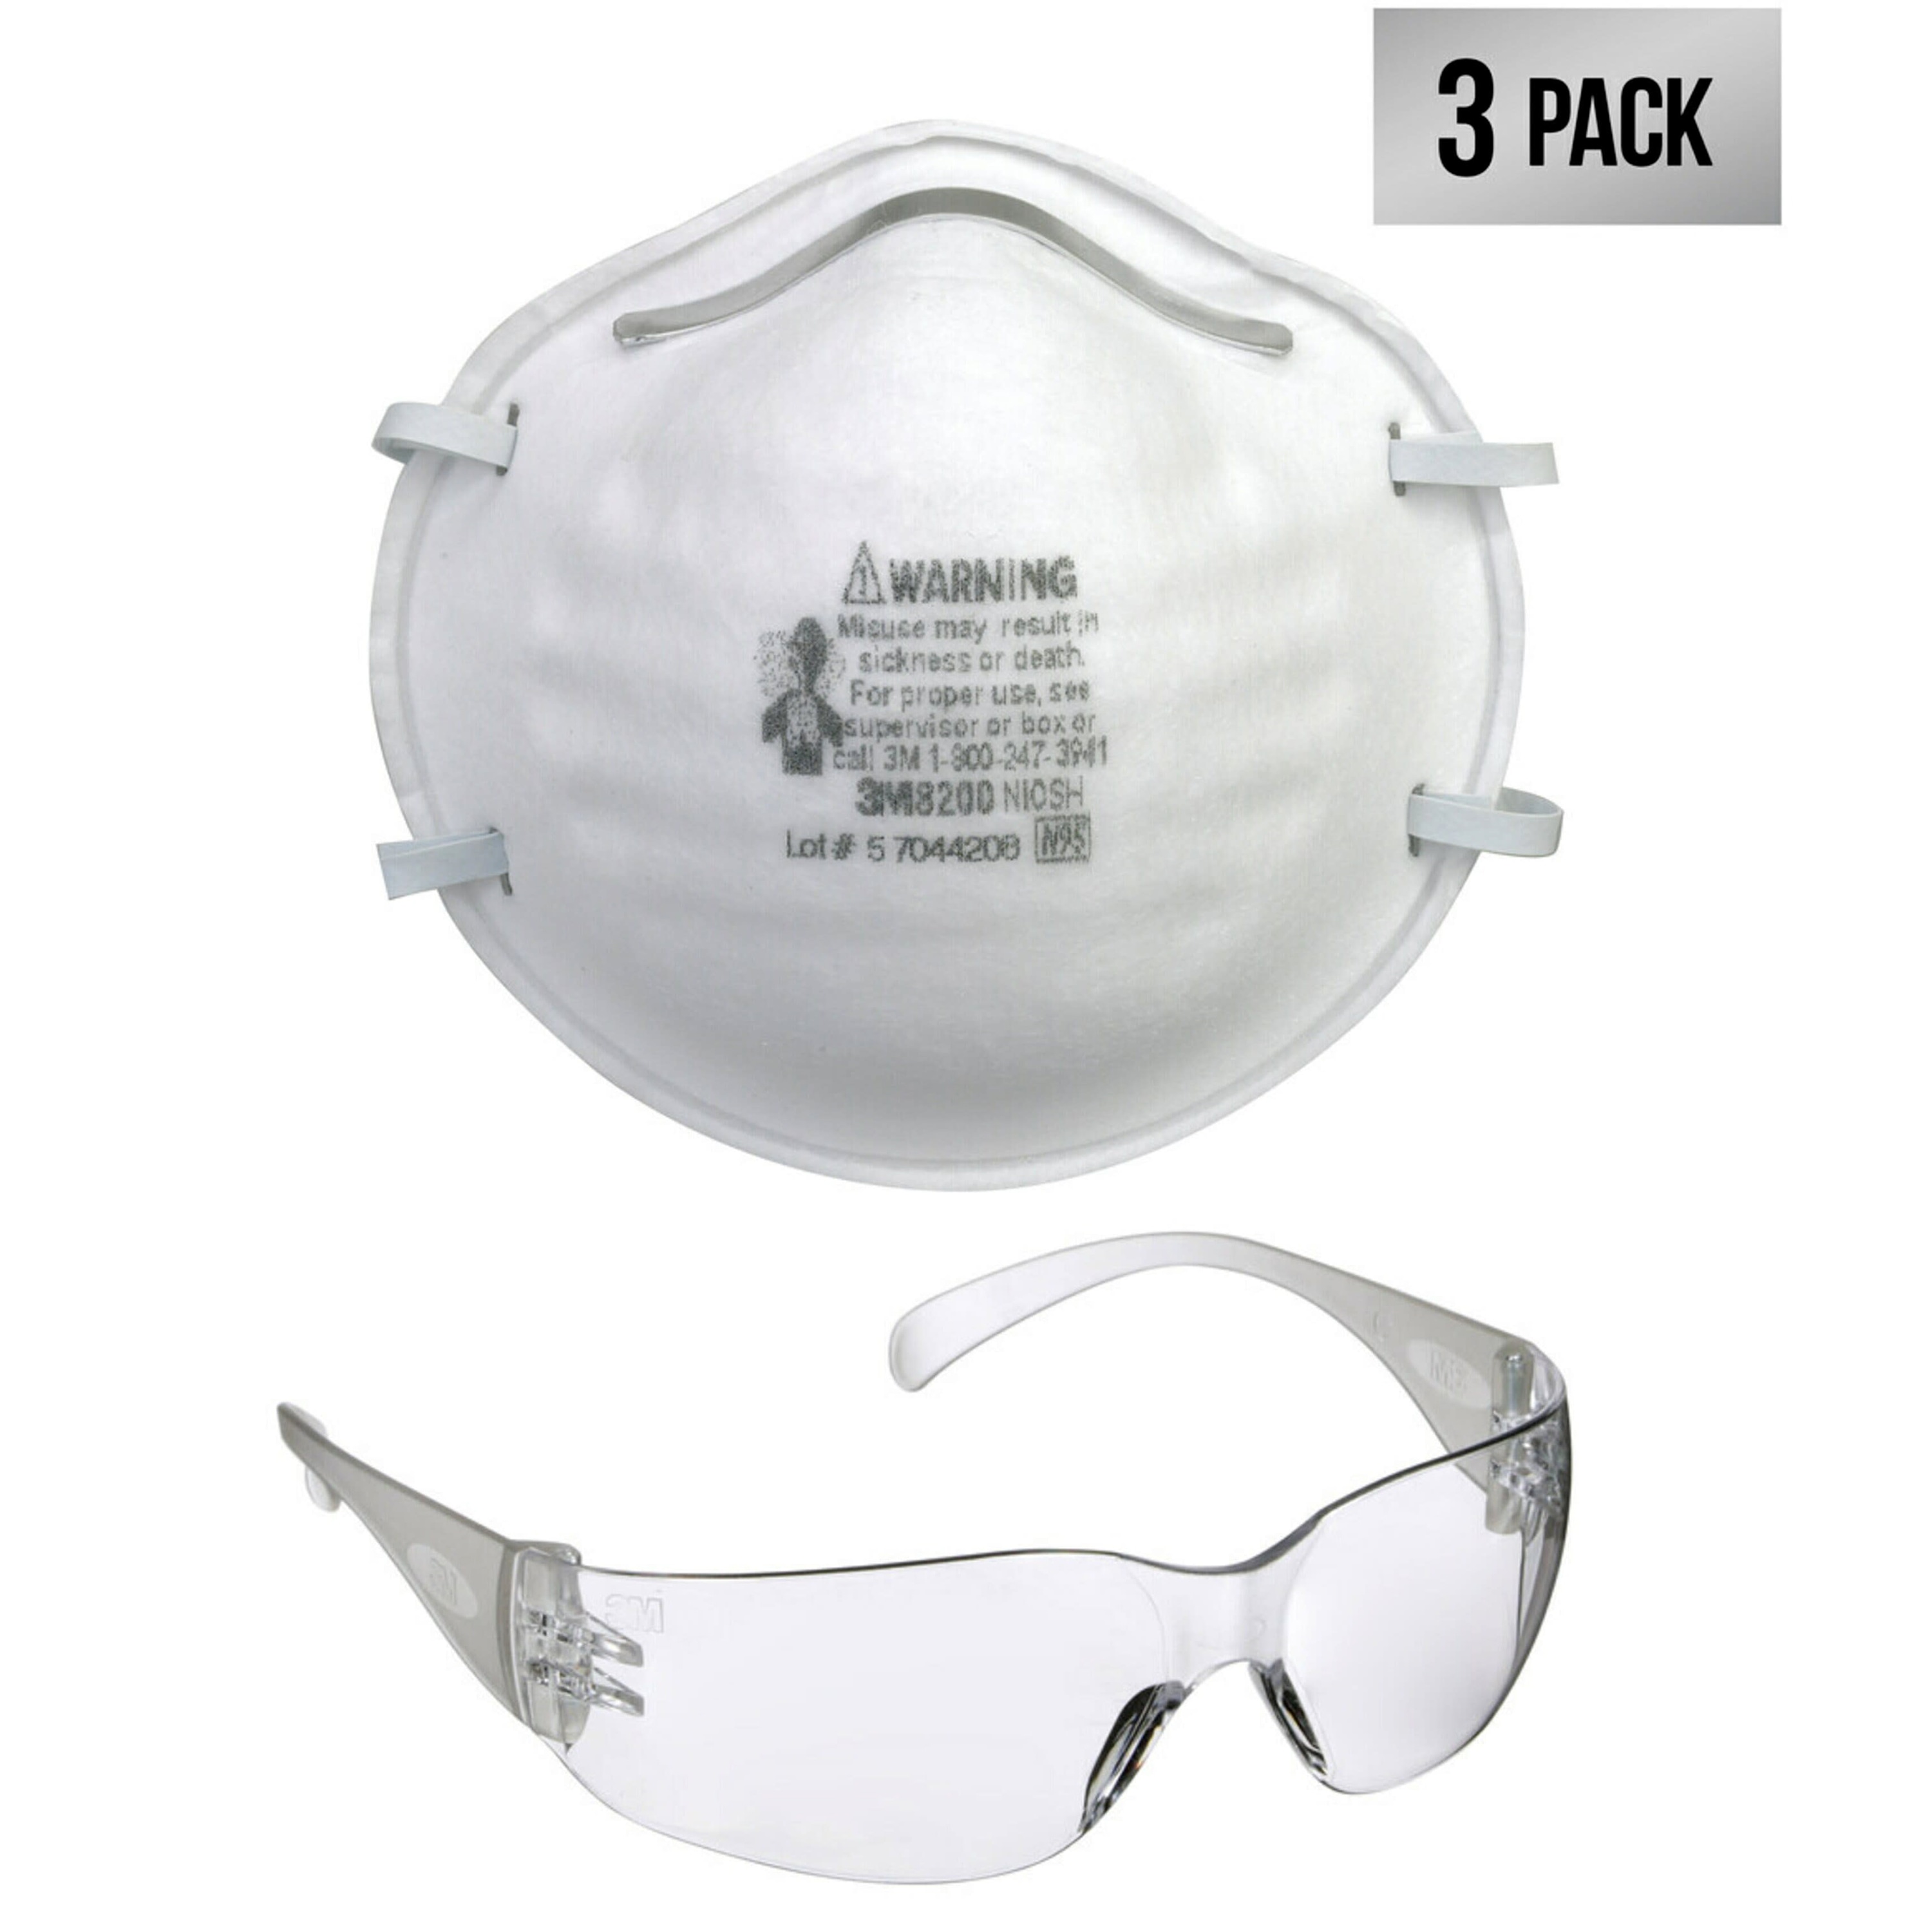 3M Plastic Safety Glasses + 3-pack Reusable N95 Painting, Sanding, and Fiberglass Safety Respirator Masks